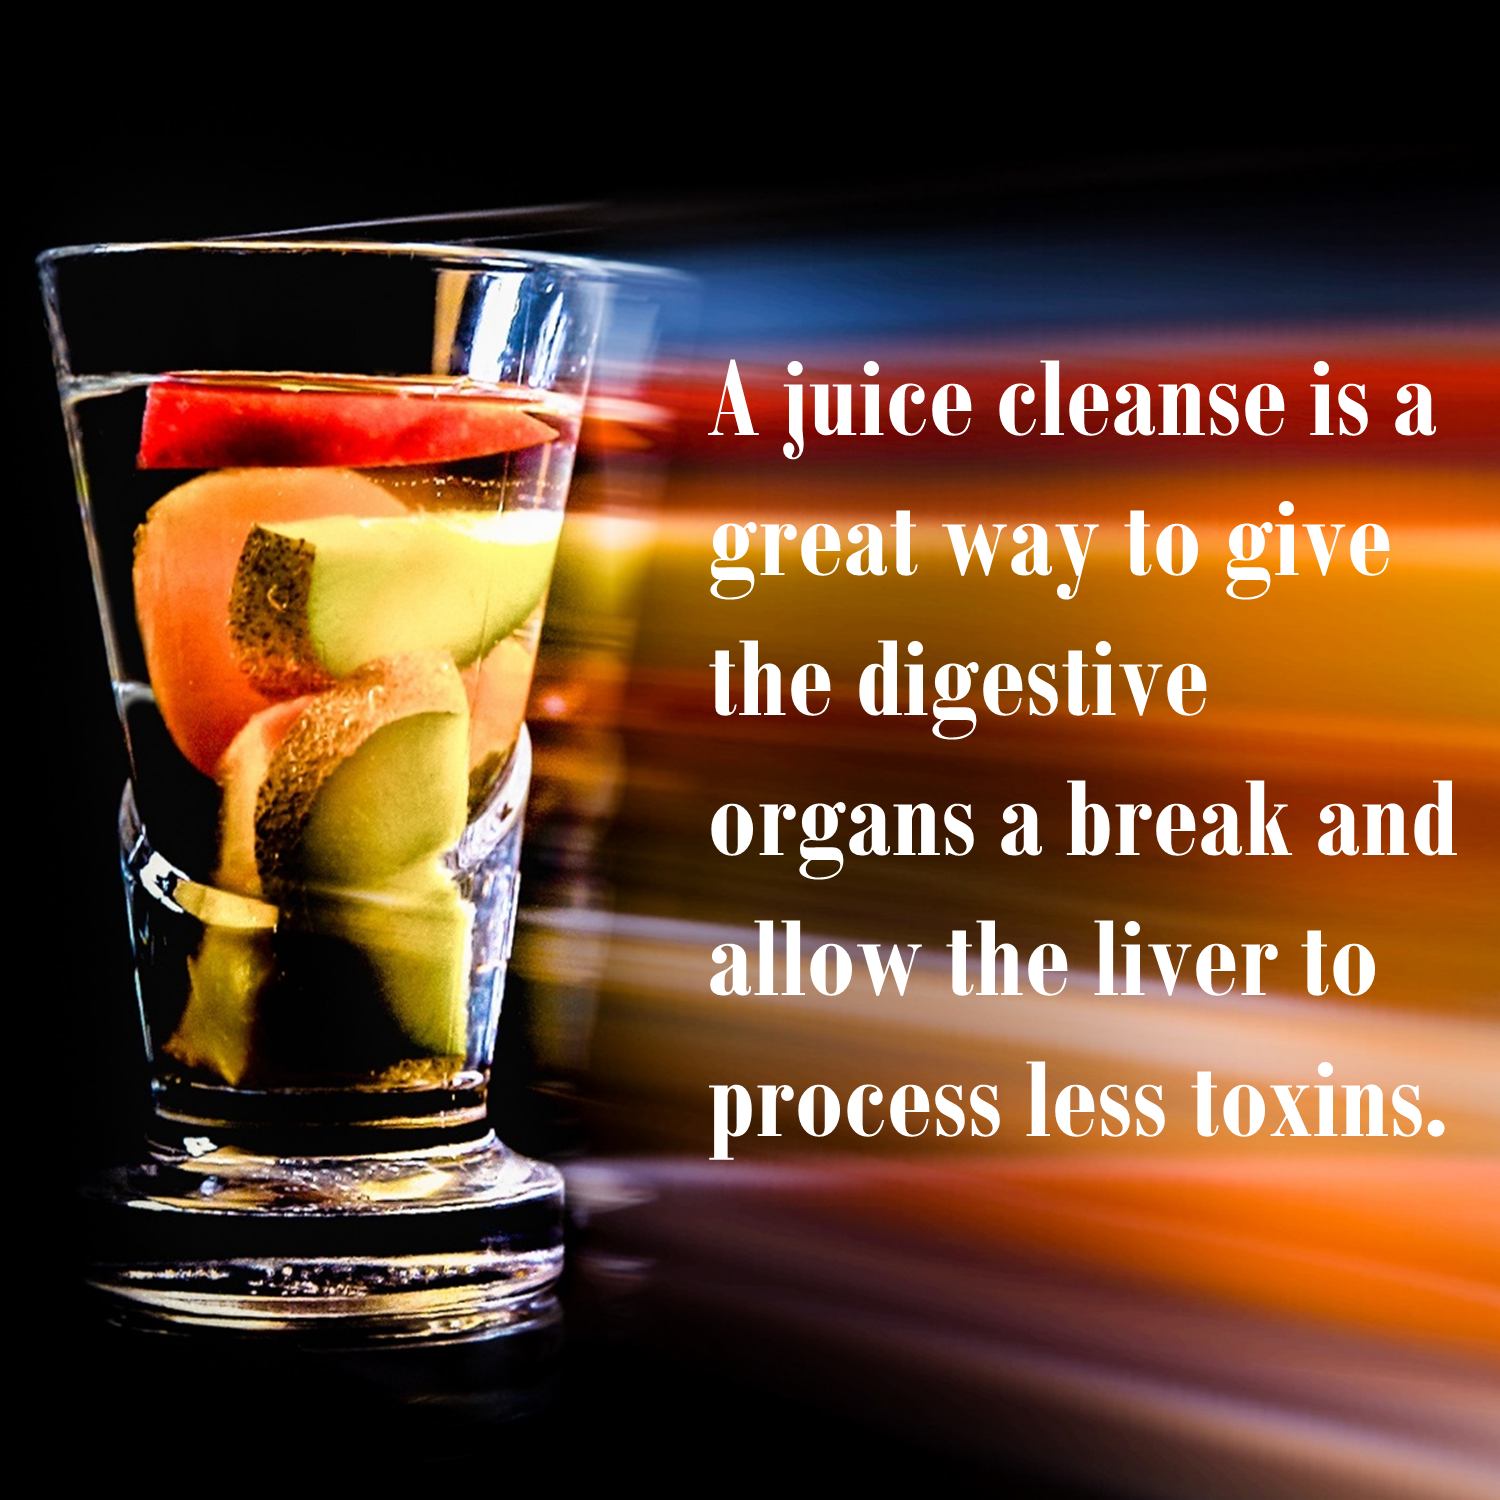 A juice cleanse is a great way to give the digestive organs a break